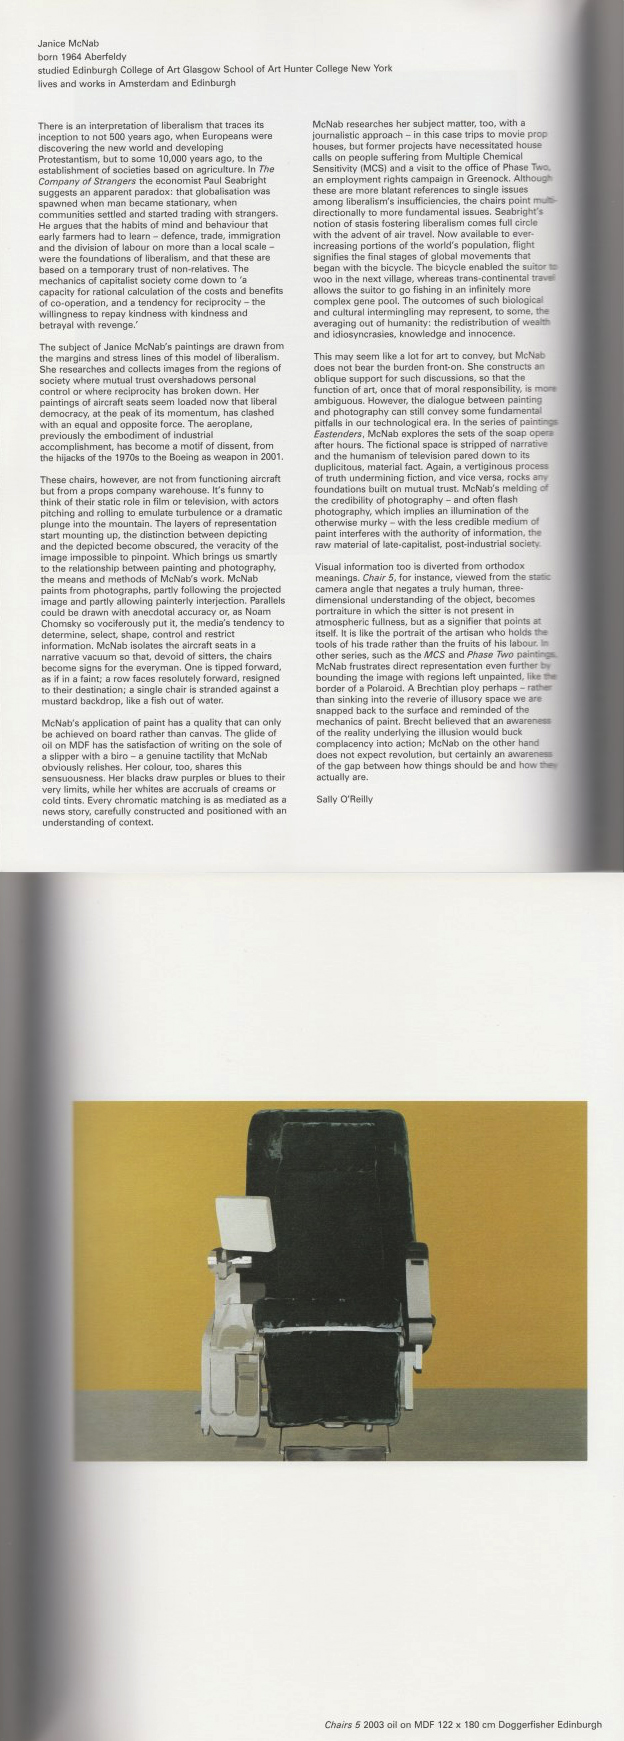 ‘Chair Paintings’ by Sally O’Reilly (2004). Essay published in ‘East Internationals’, Norwich Gallery, UK.